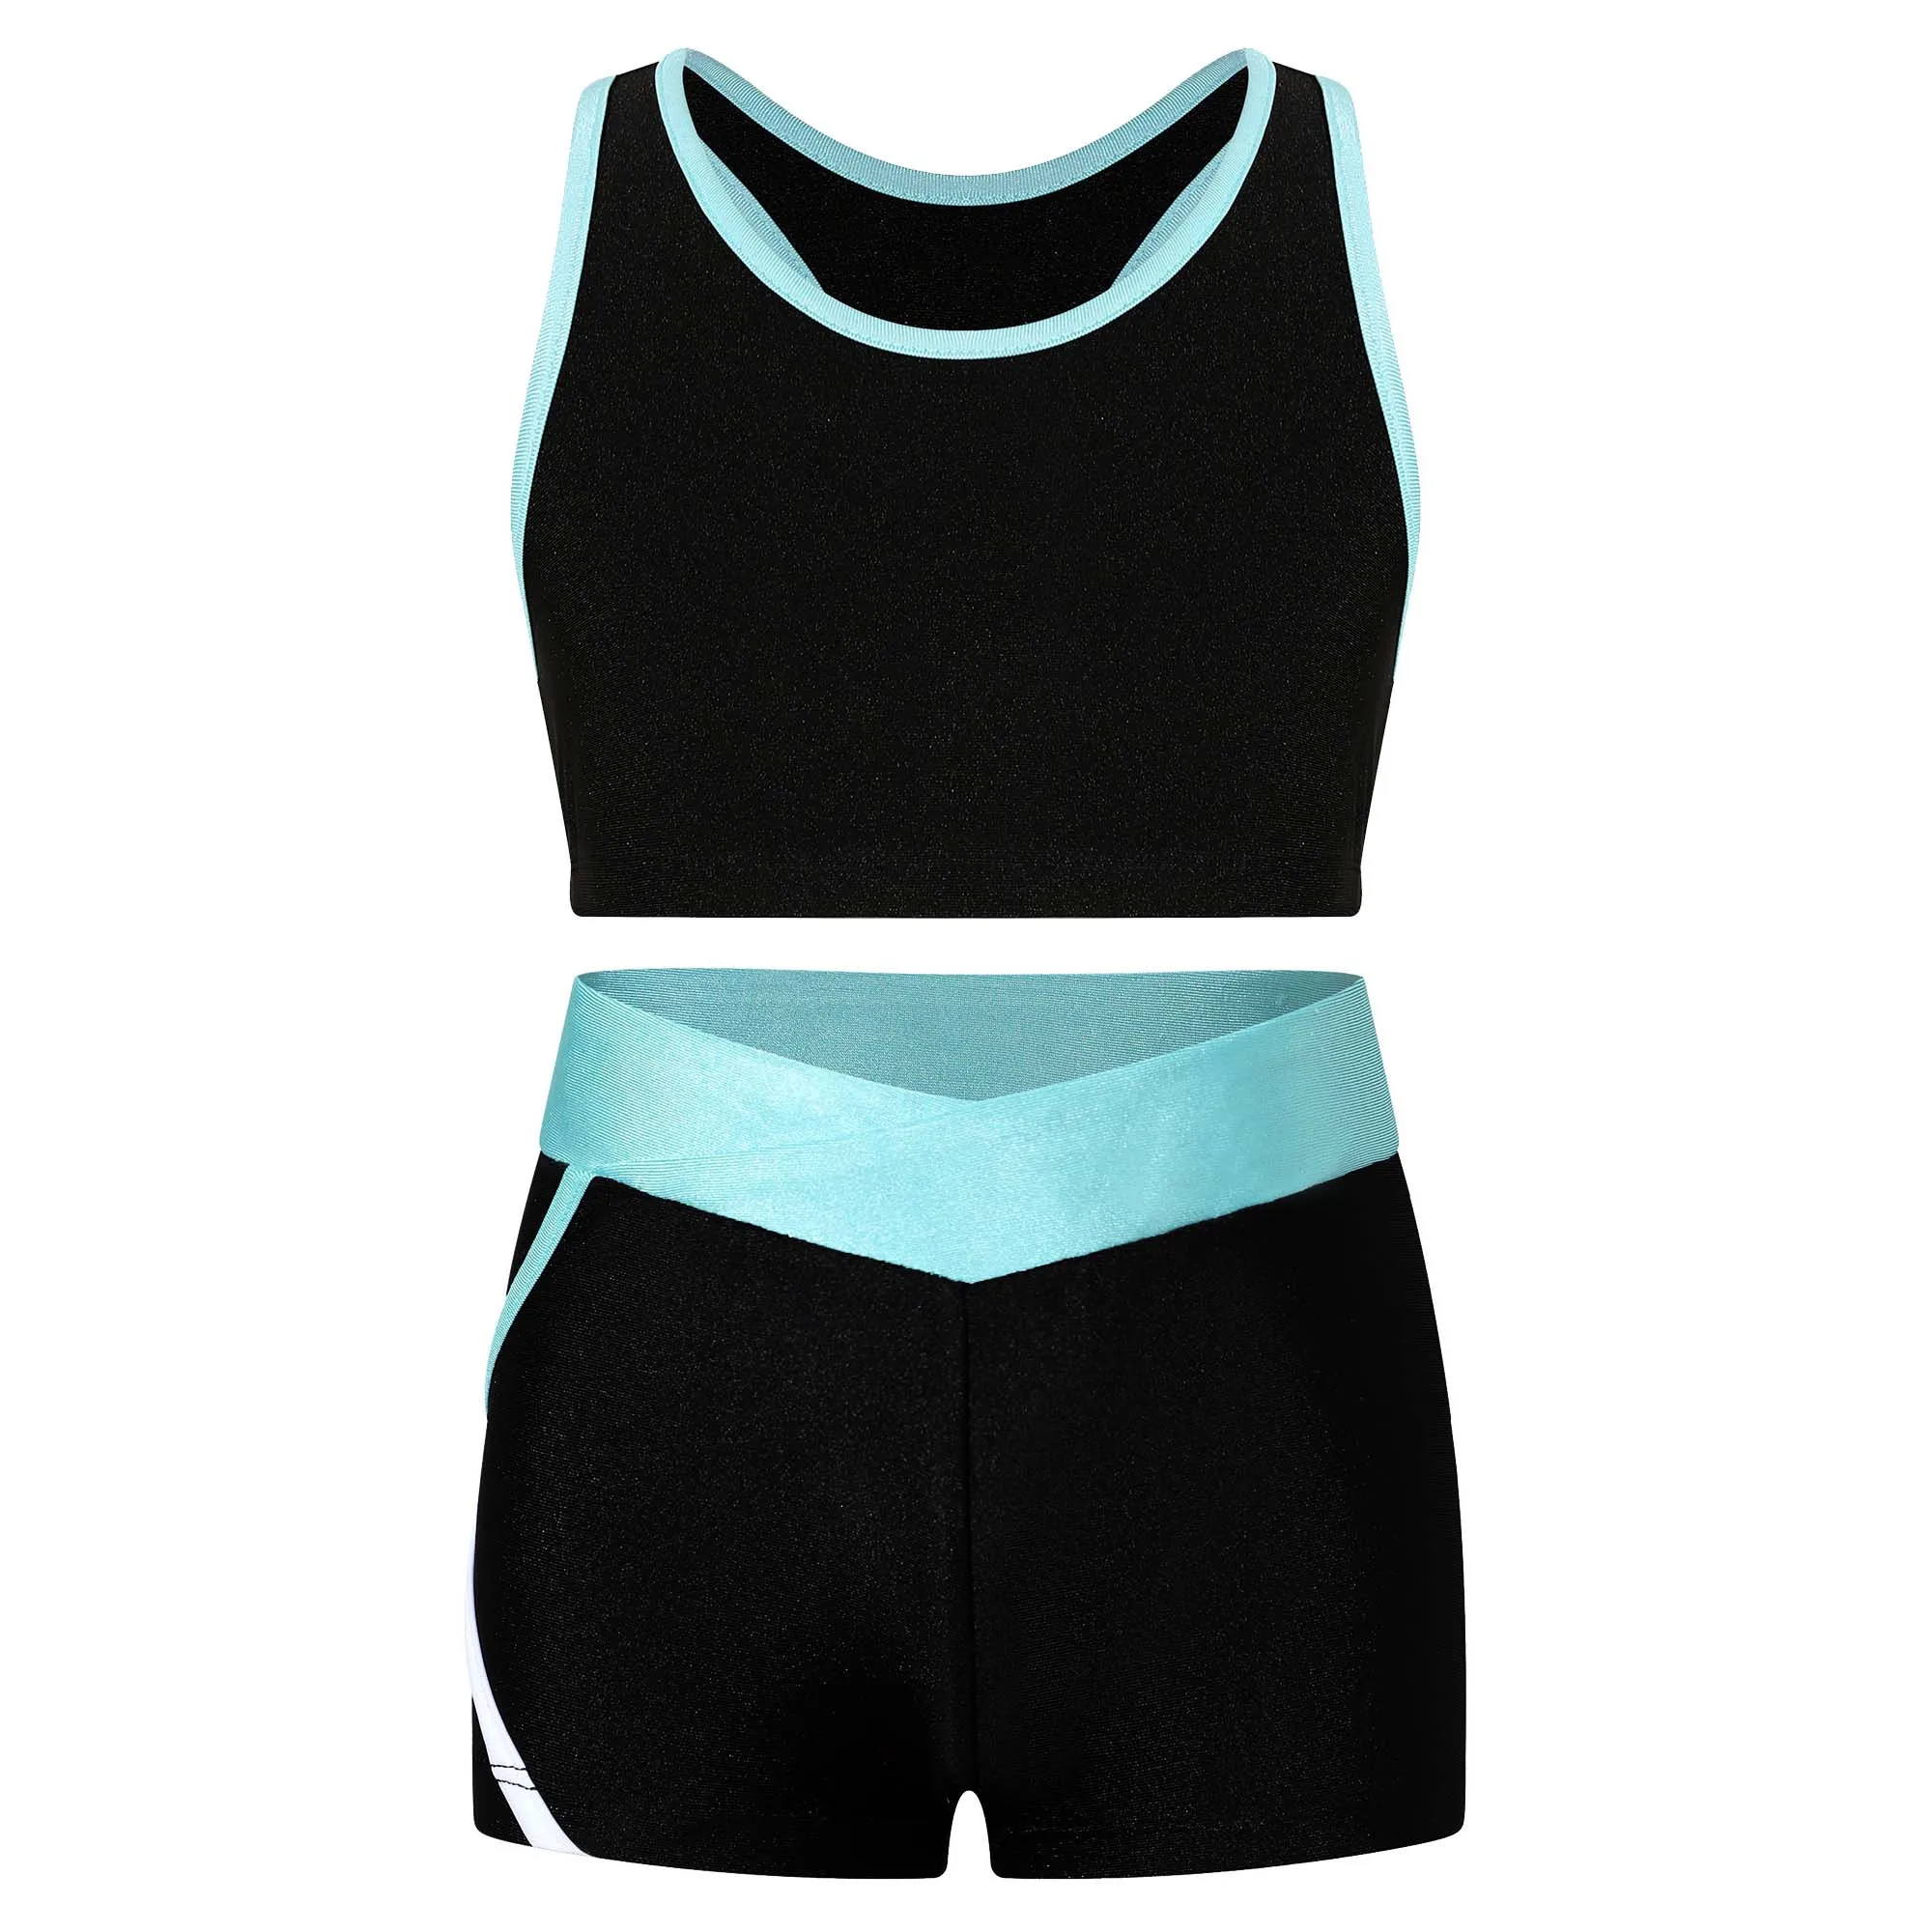 Kids Girls Two Pieces Swimsuit Swimwear Sleeveless Contrast Trim Crop Tops with Skinny Shorts Racer Back Fitness Costume